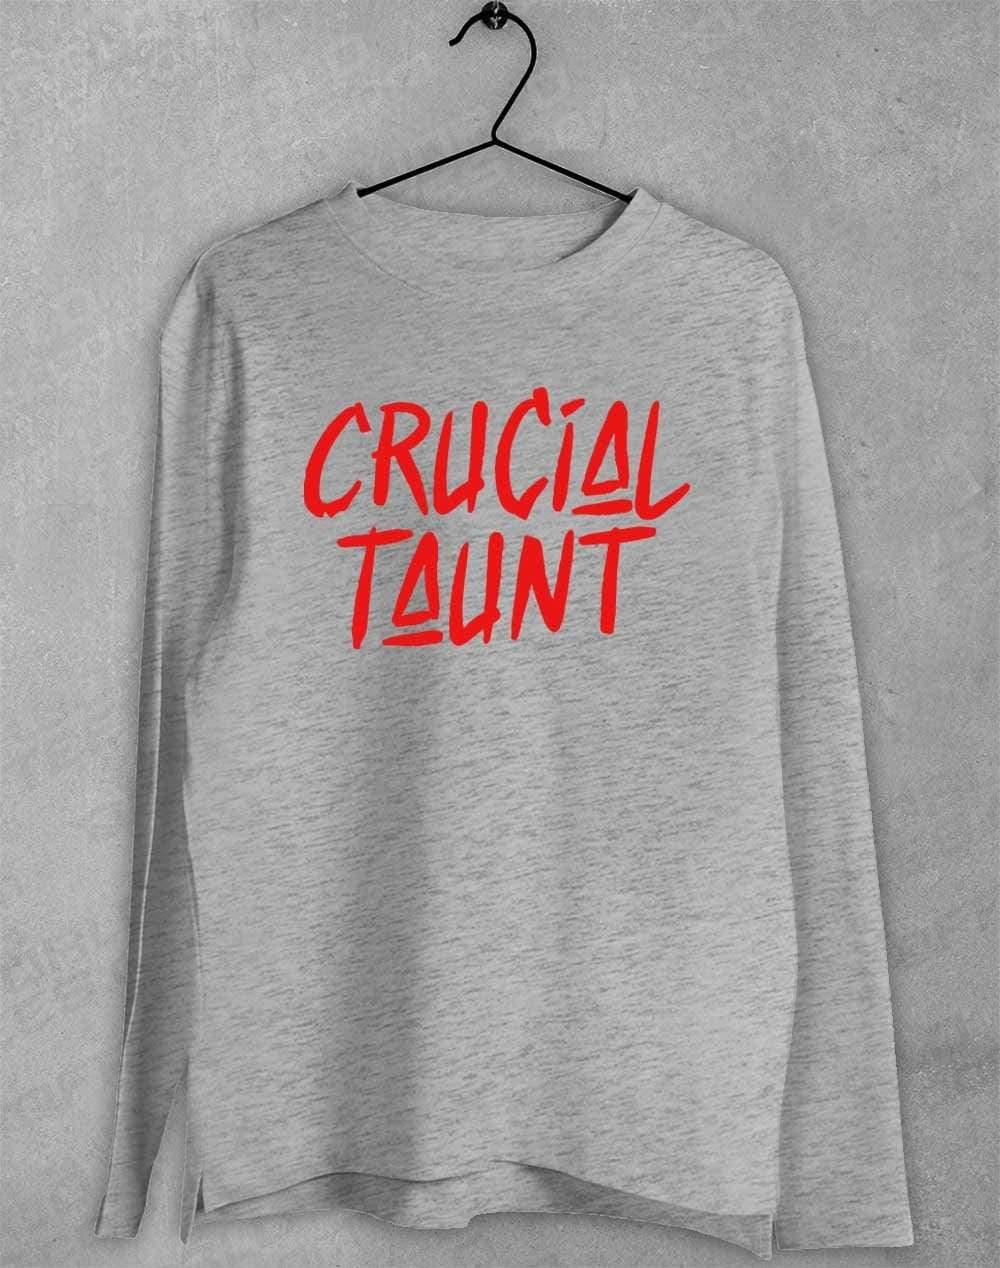 Crucial Taunt Long Sleeve T-Shirt S / Sport Grey  - Off World Tees